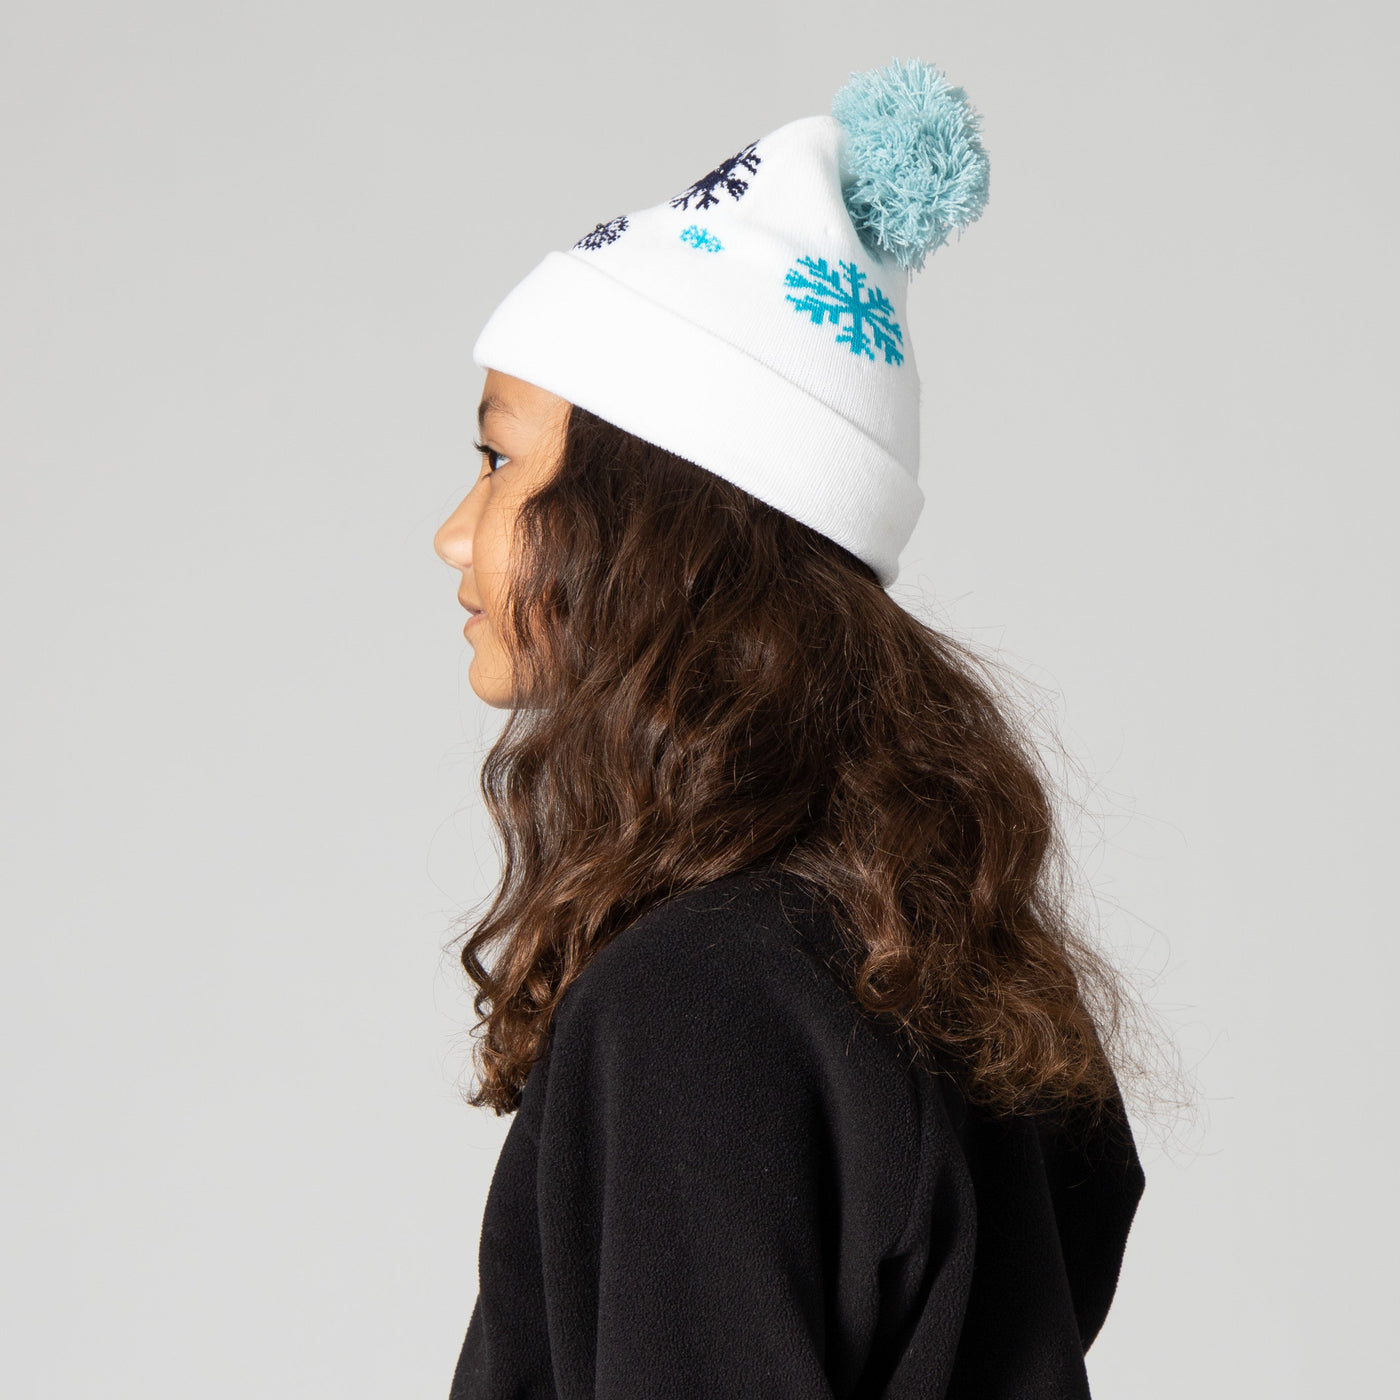 BEANIE - Light Up Beanie With SnowFlakes